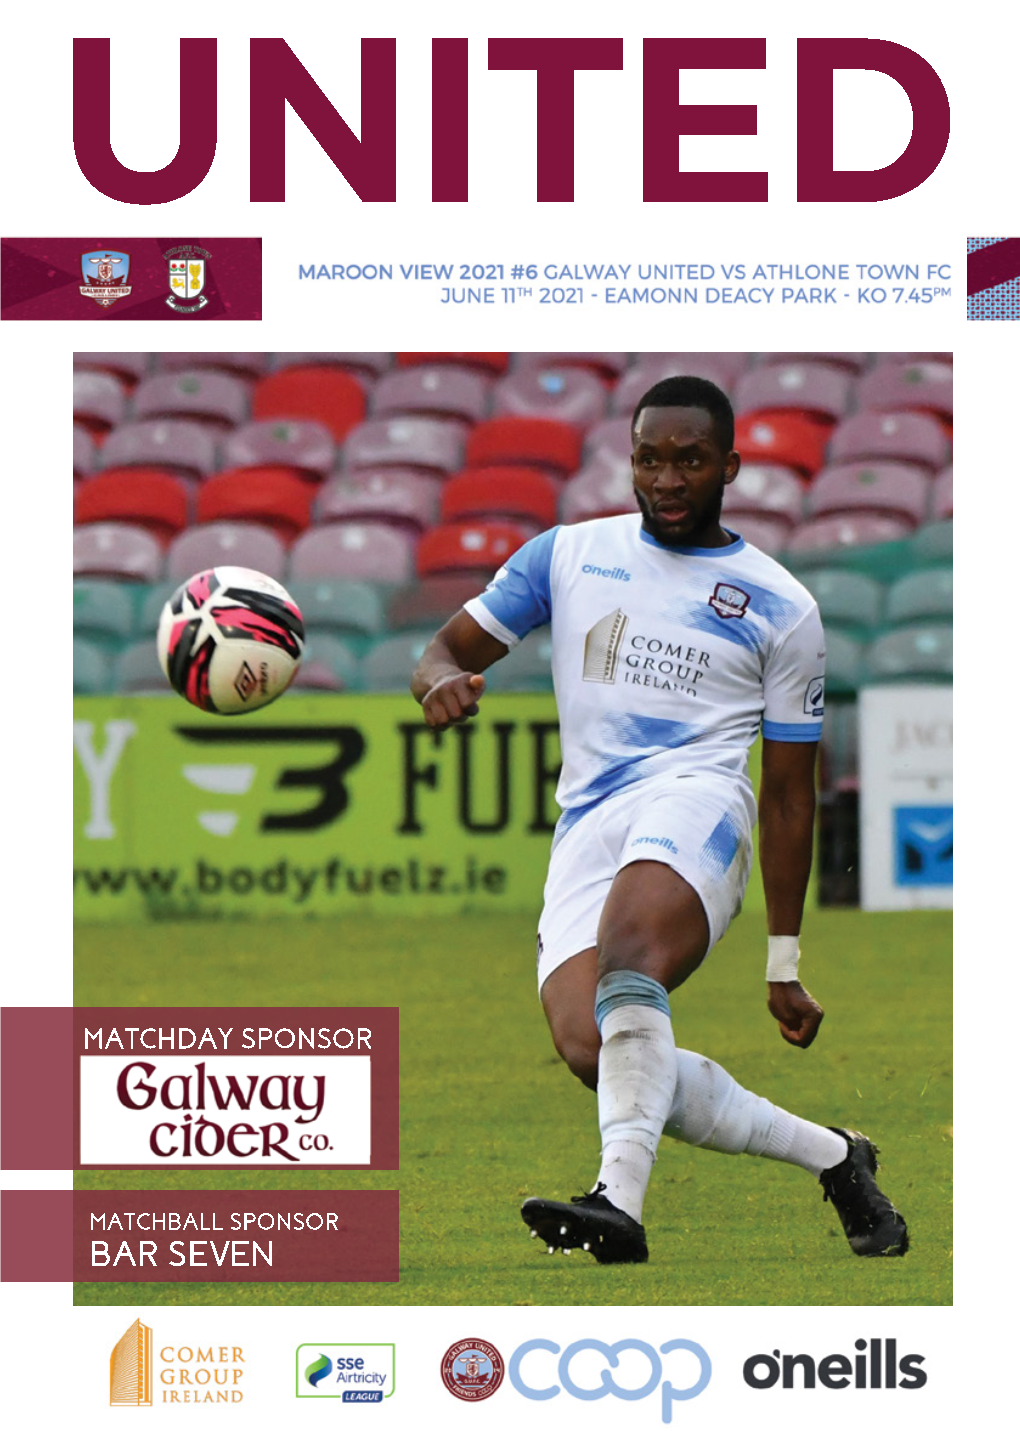 Maroon View 1 Proud Partners of Galway United F.C